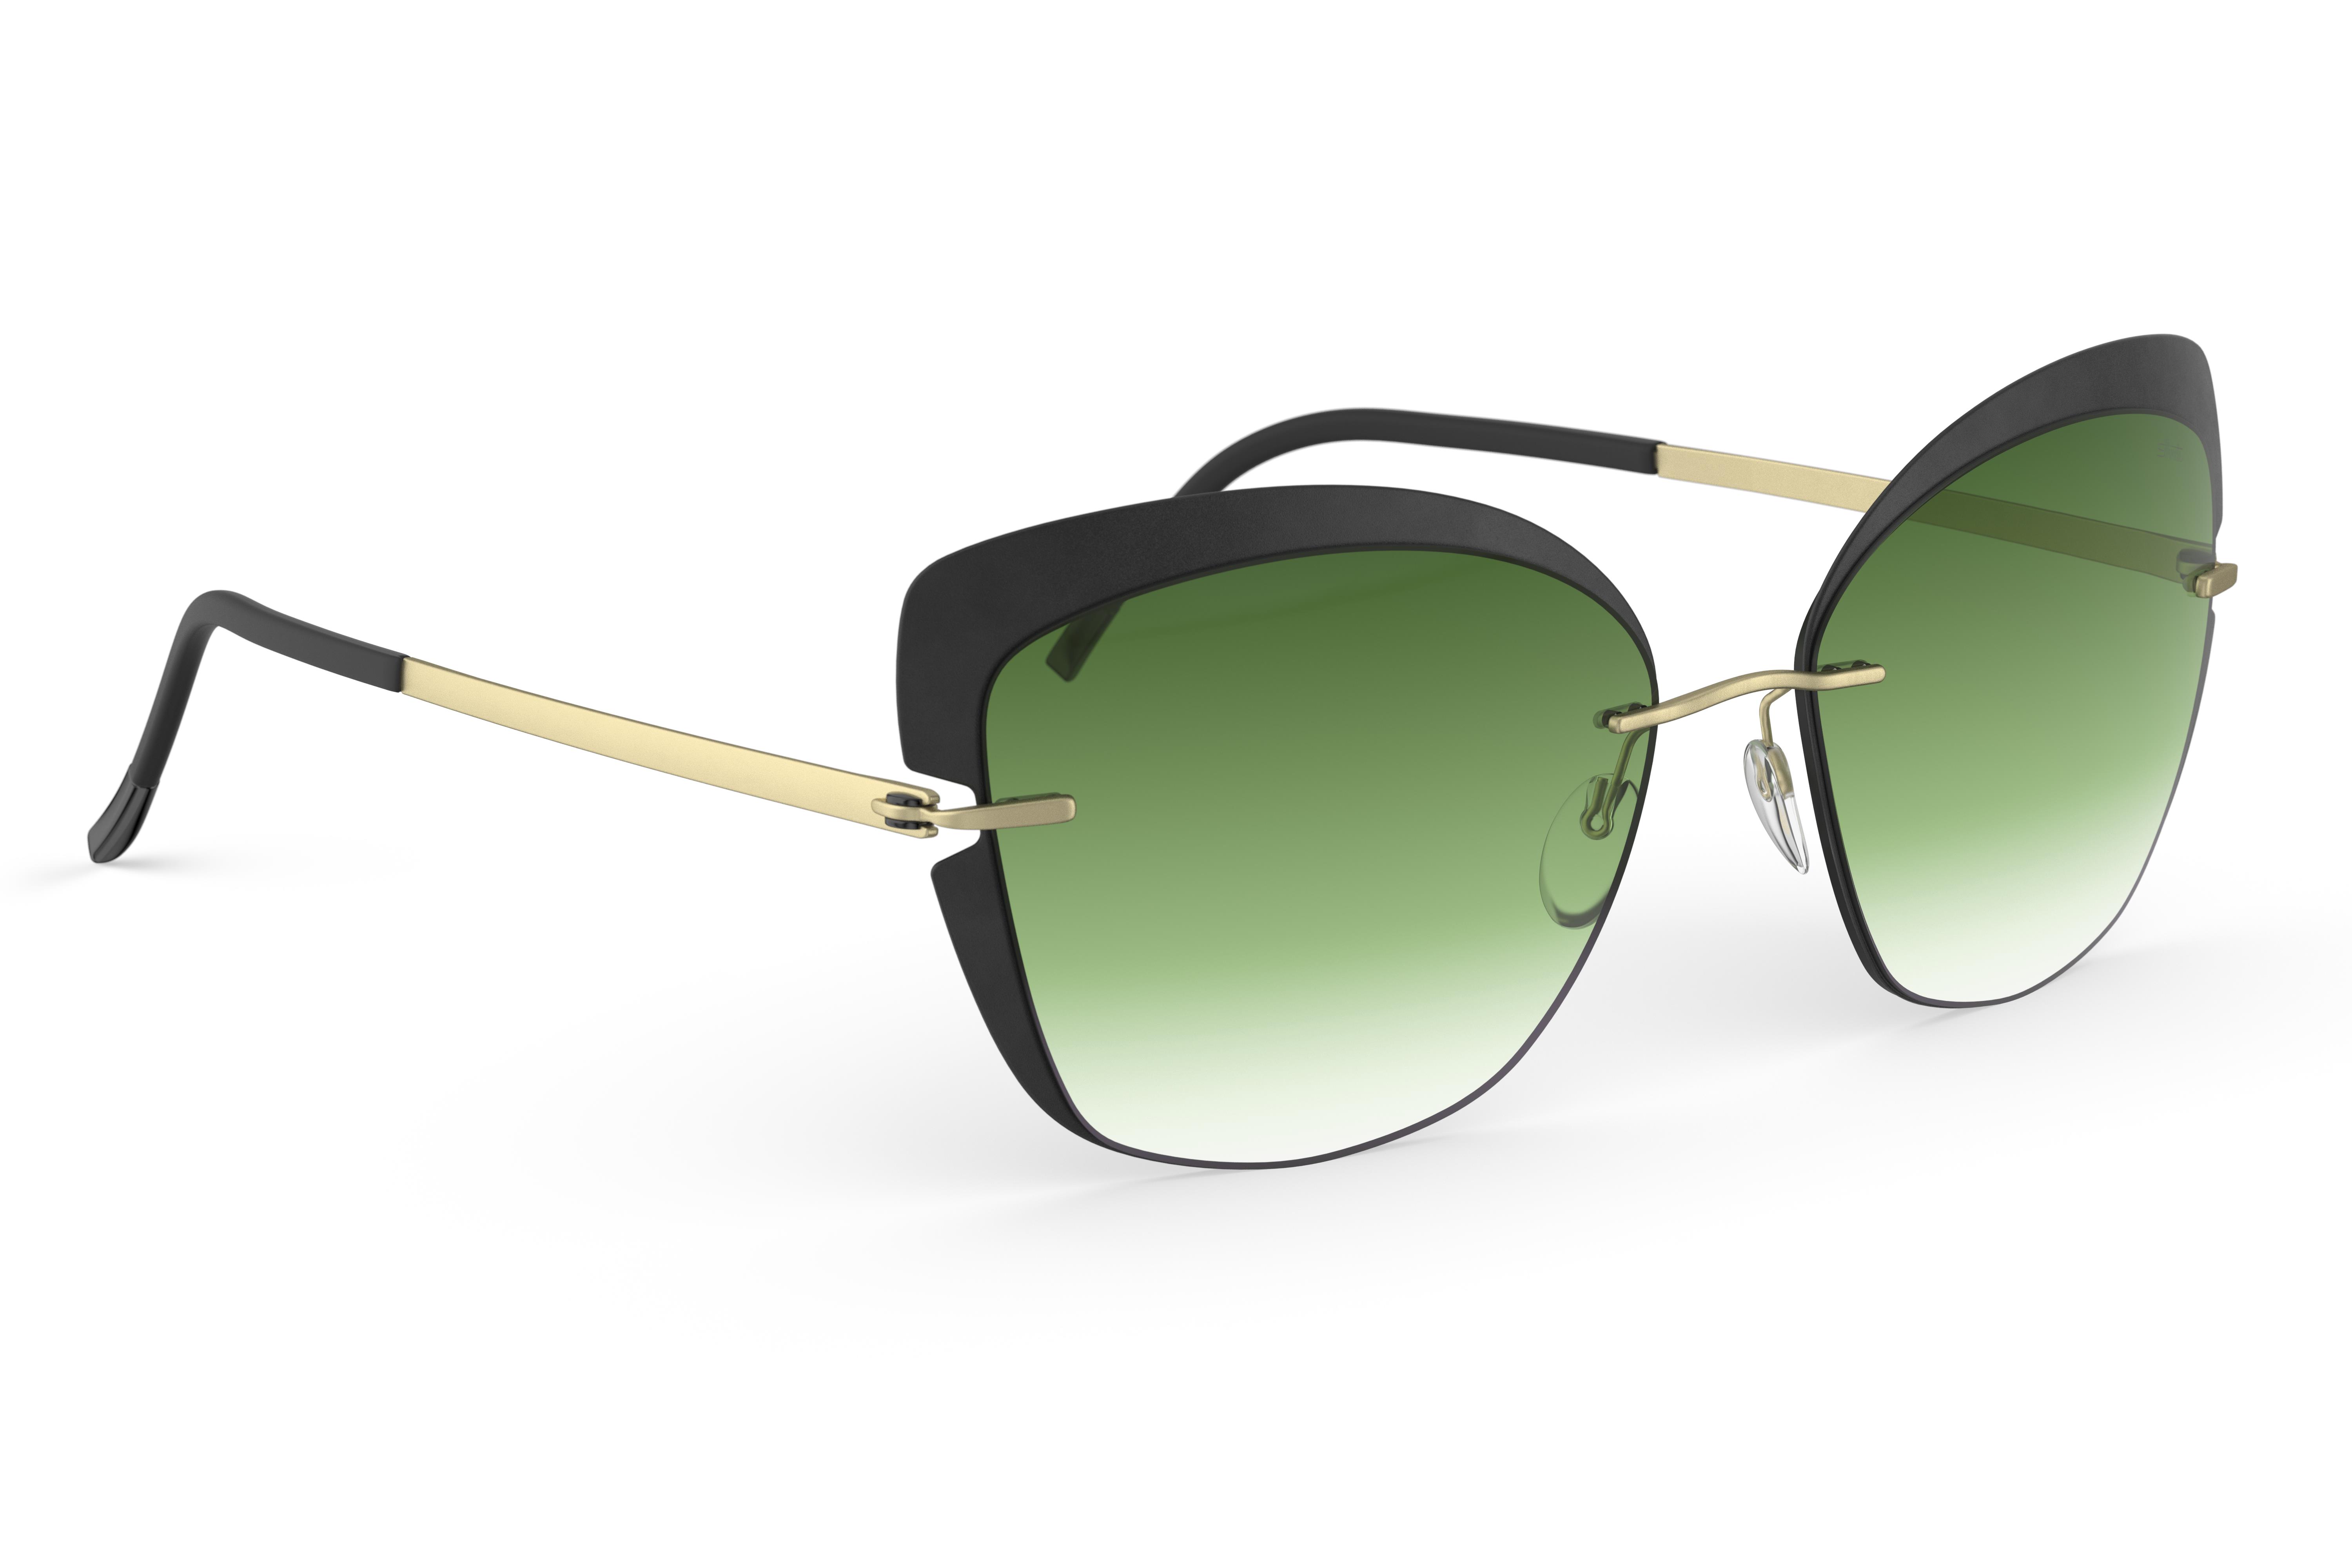 silhouette_spittelberg_8166_accent_shades_classic_green_gradient